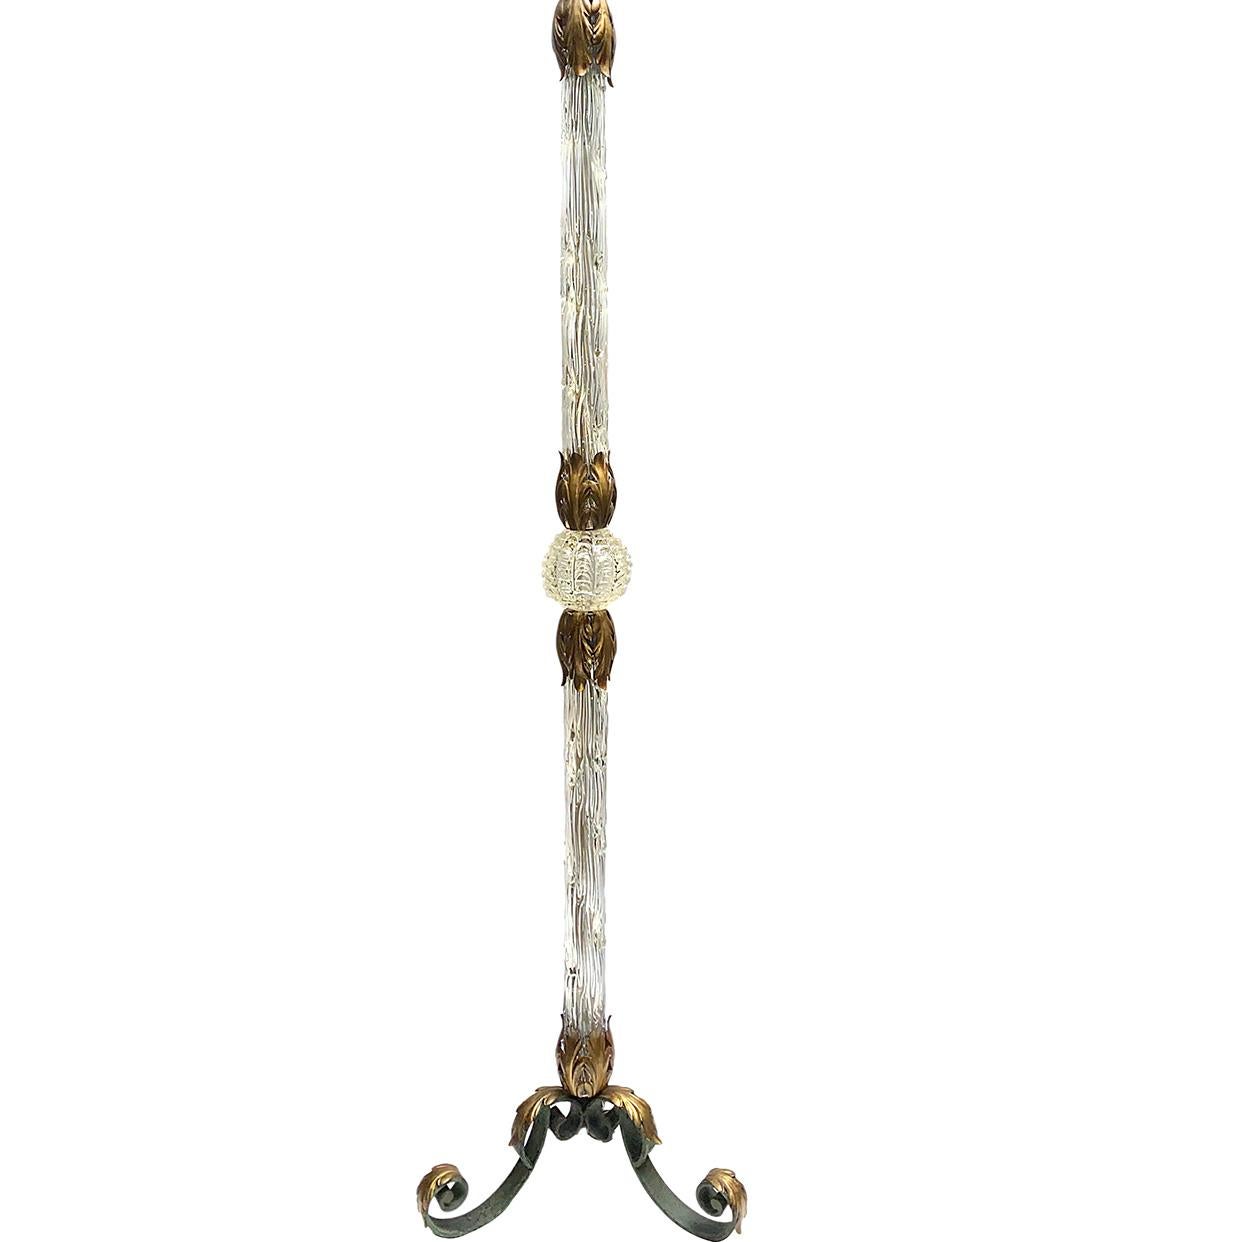 A circa 1950's French blown glass and gilt metal floor lamp with wrought iron base. 

Measurements:
Height of body: 66